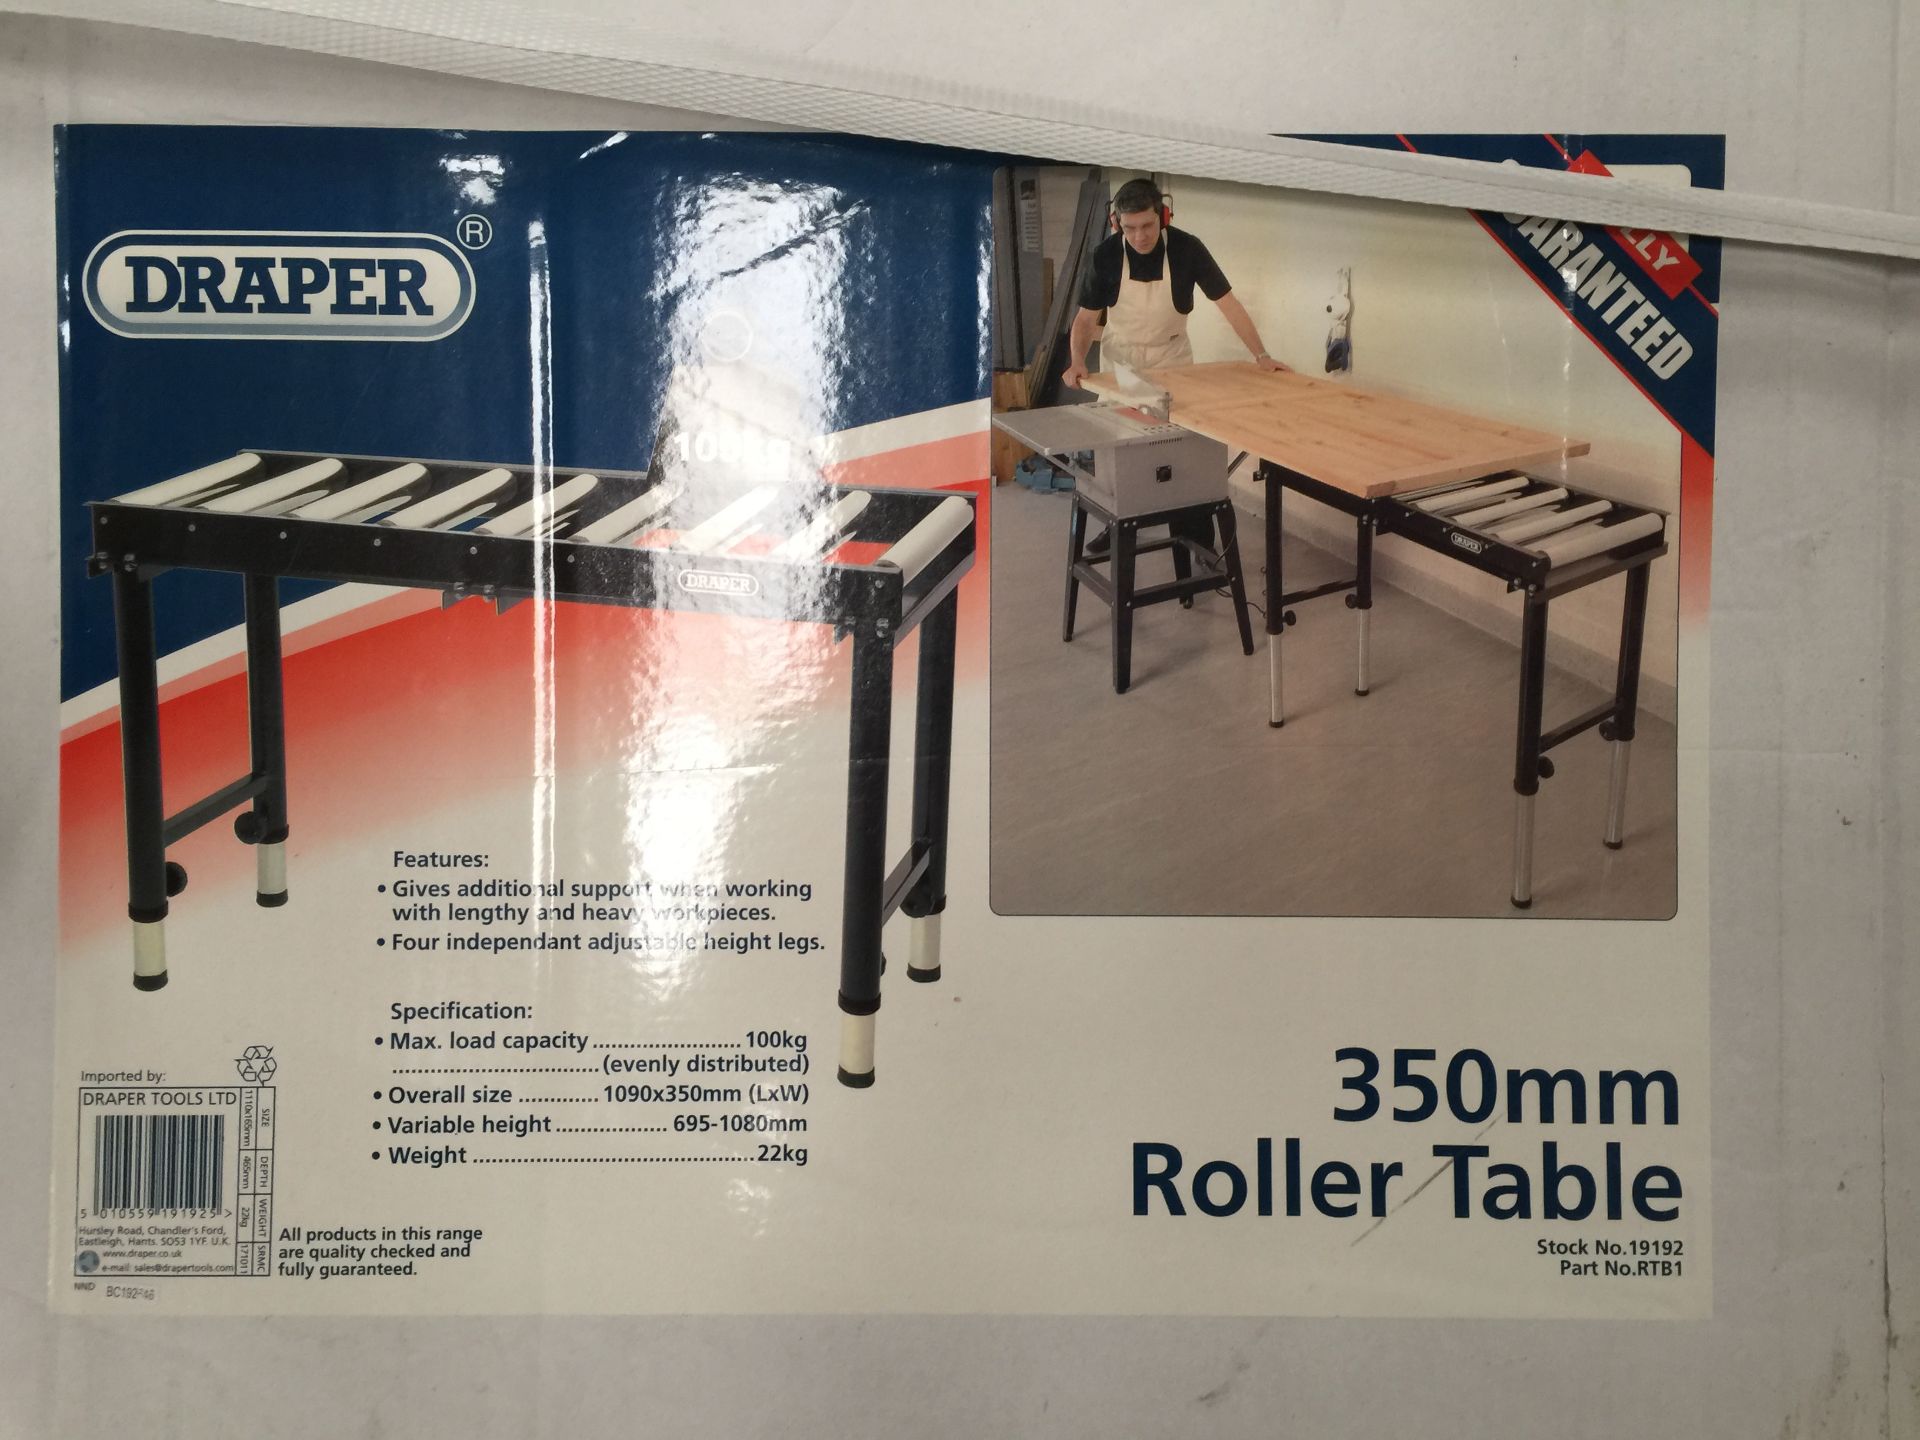 Draper Roller Tables x 2 | Size: 35mm | 1 new in box - Image 8 of 8